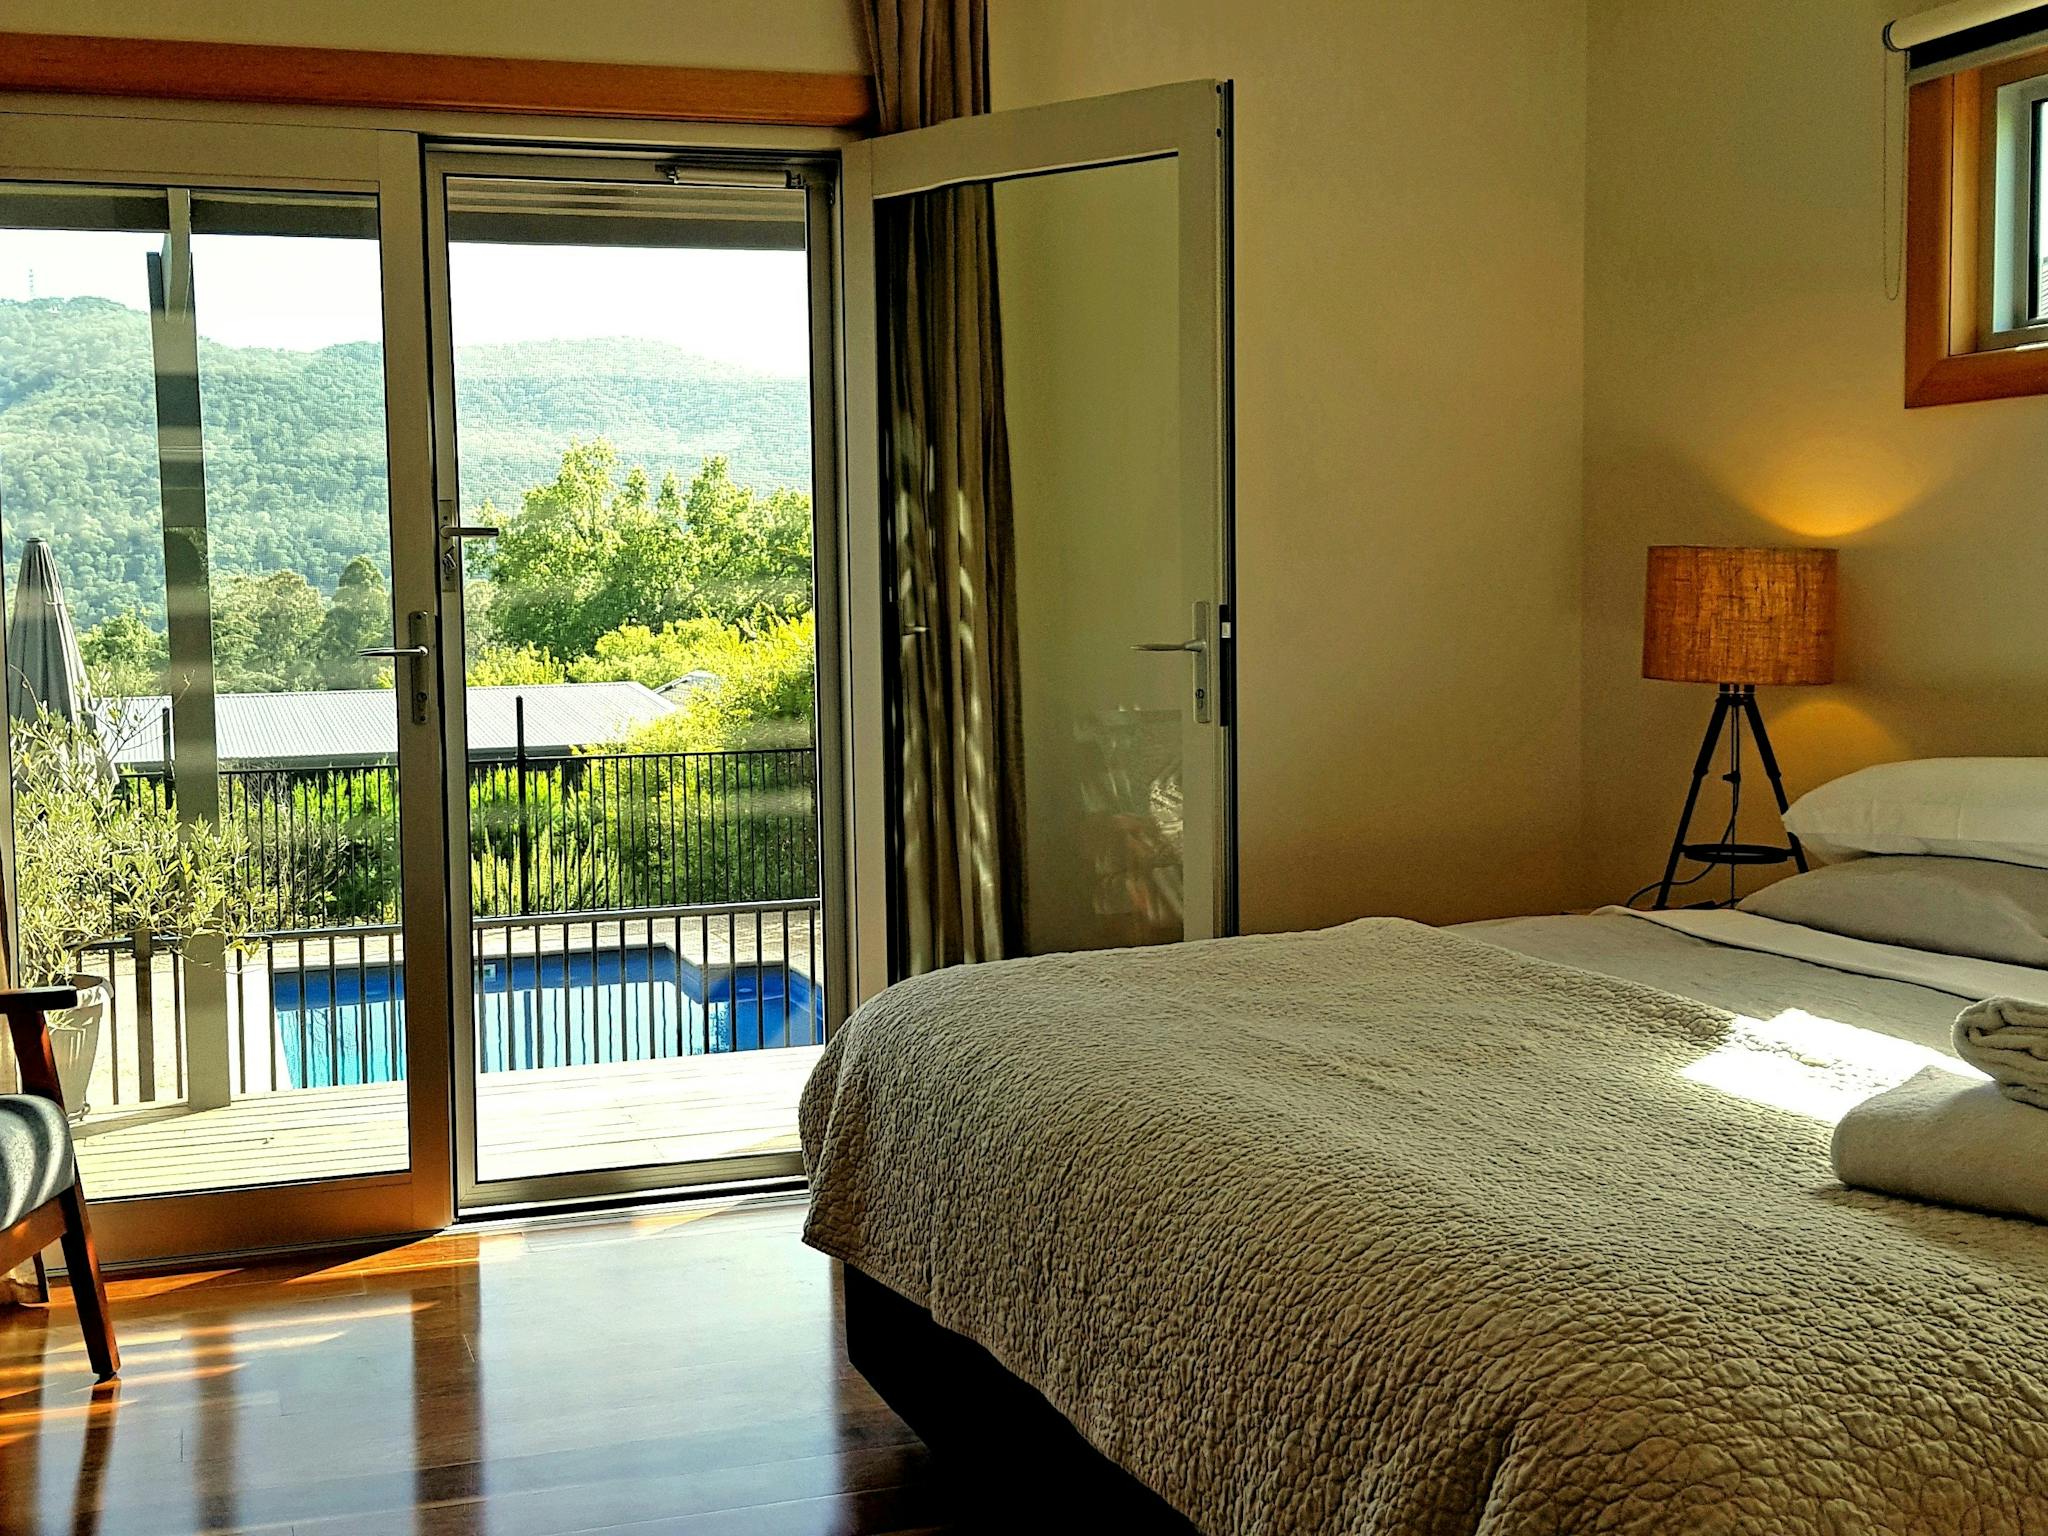 Master bedroom with views